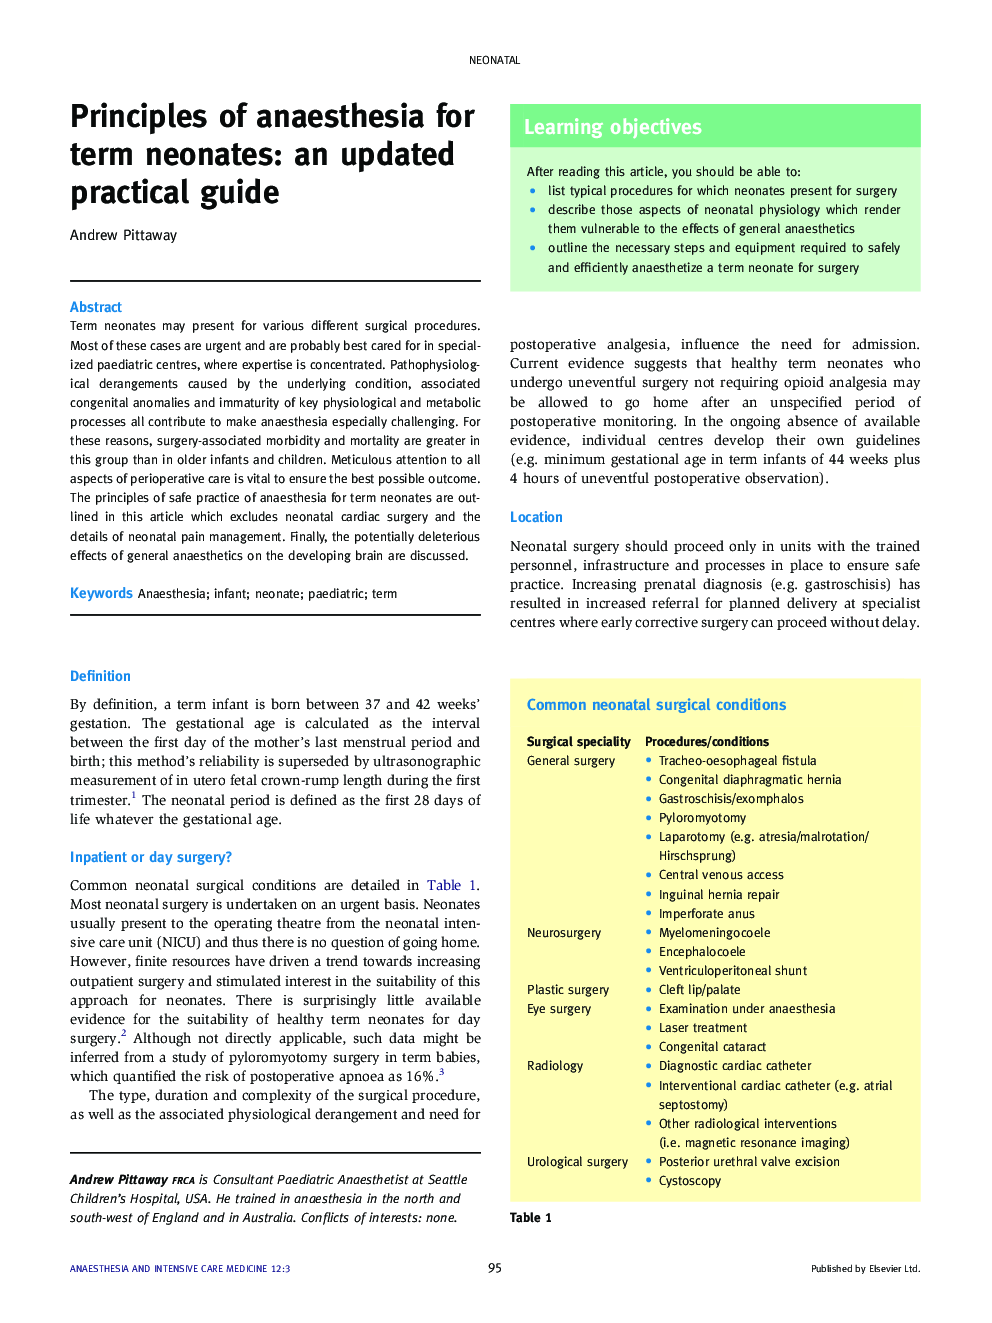 Principles of anaesthesia for term neonates: an updated practical guide